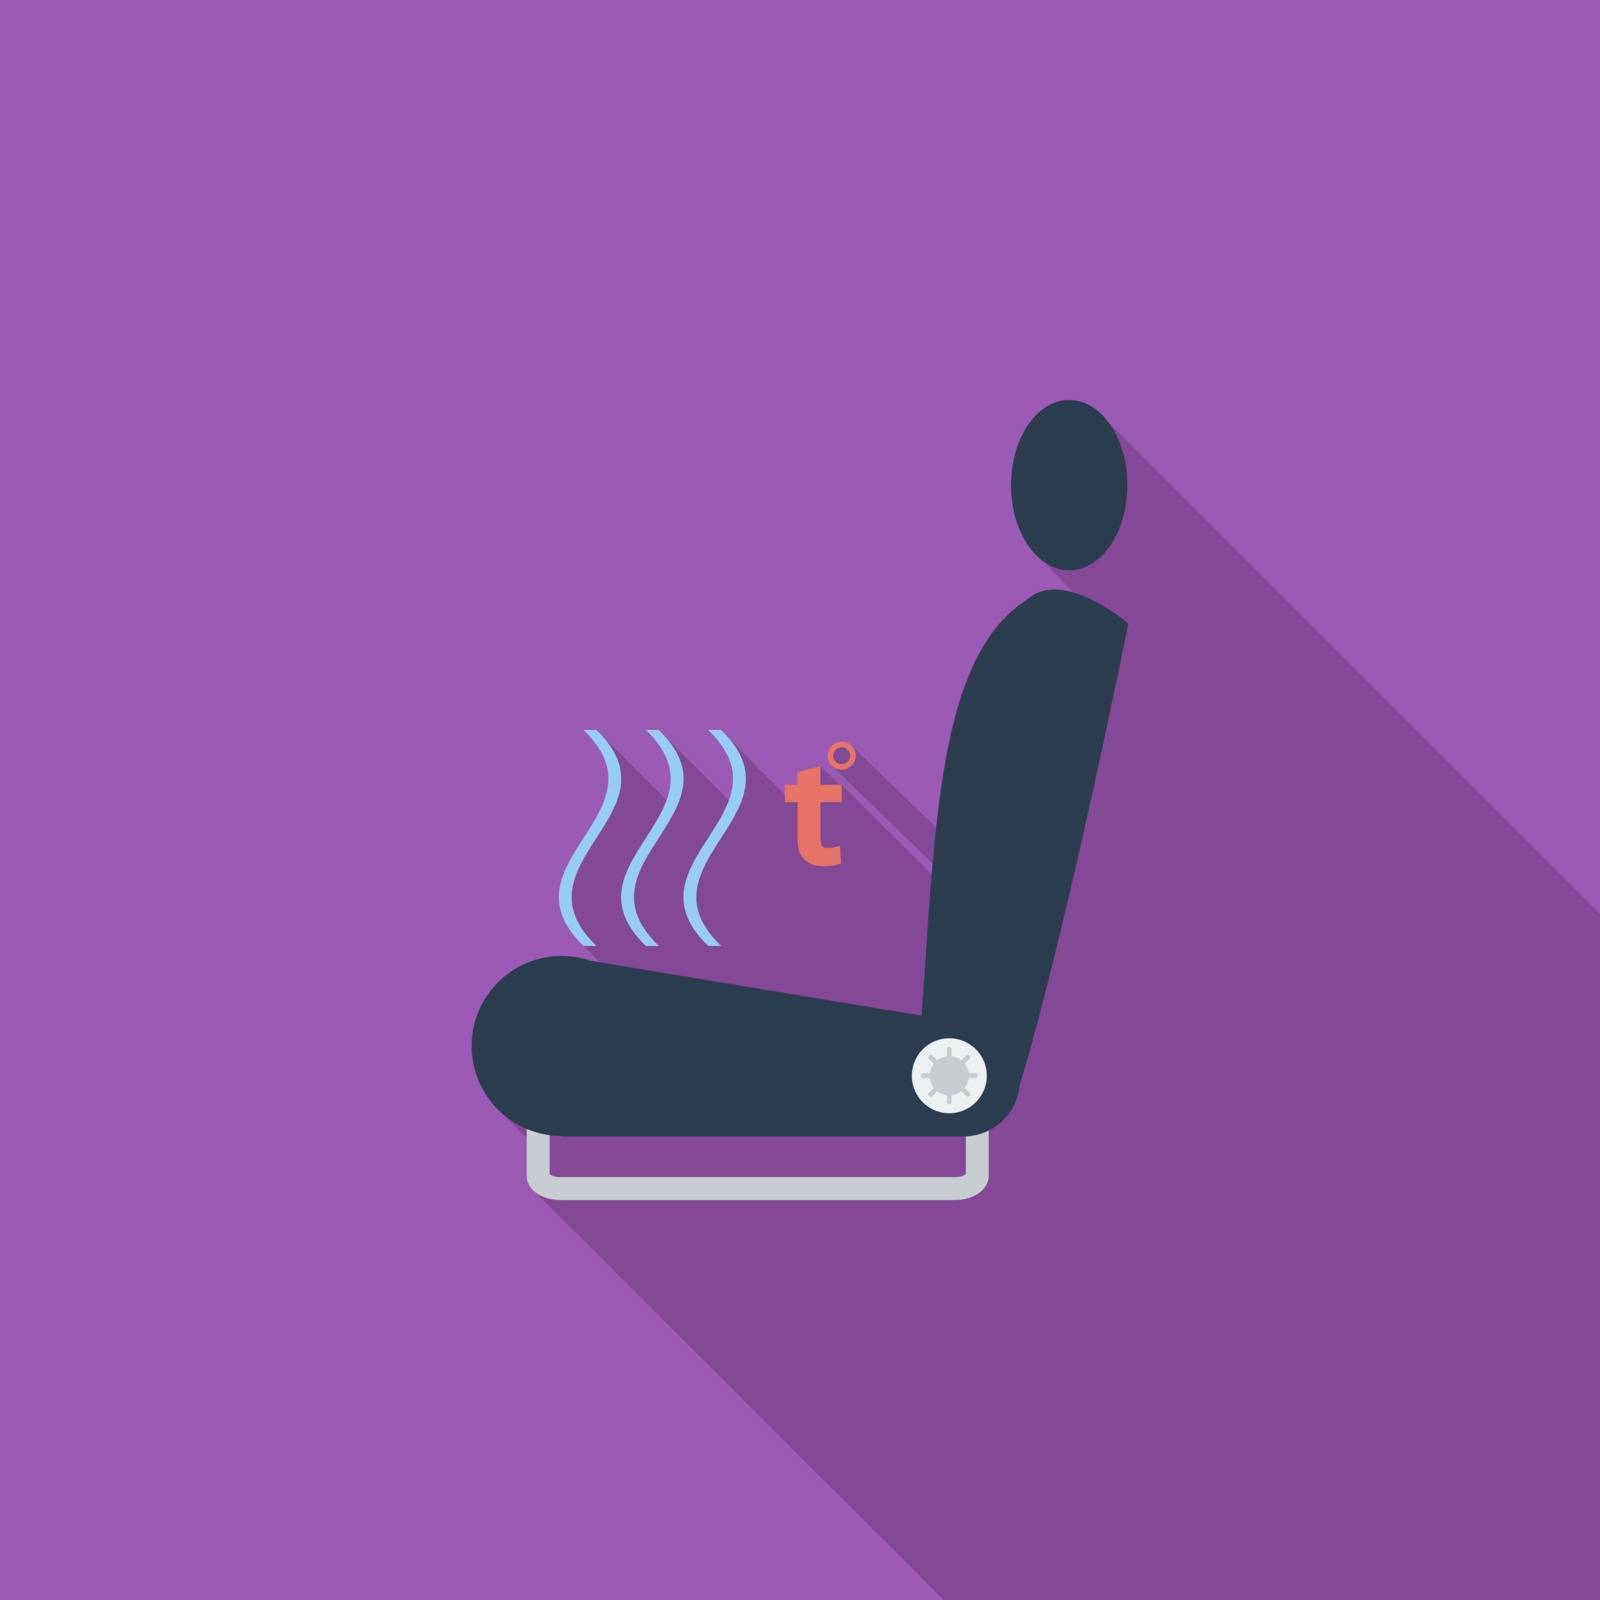 Heated seat icon. Flat vector related icon with long shadow for web and mobile applications. It can be used as - logo, pictogram, icon, infographic element. Vector Illustration.